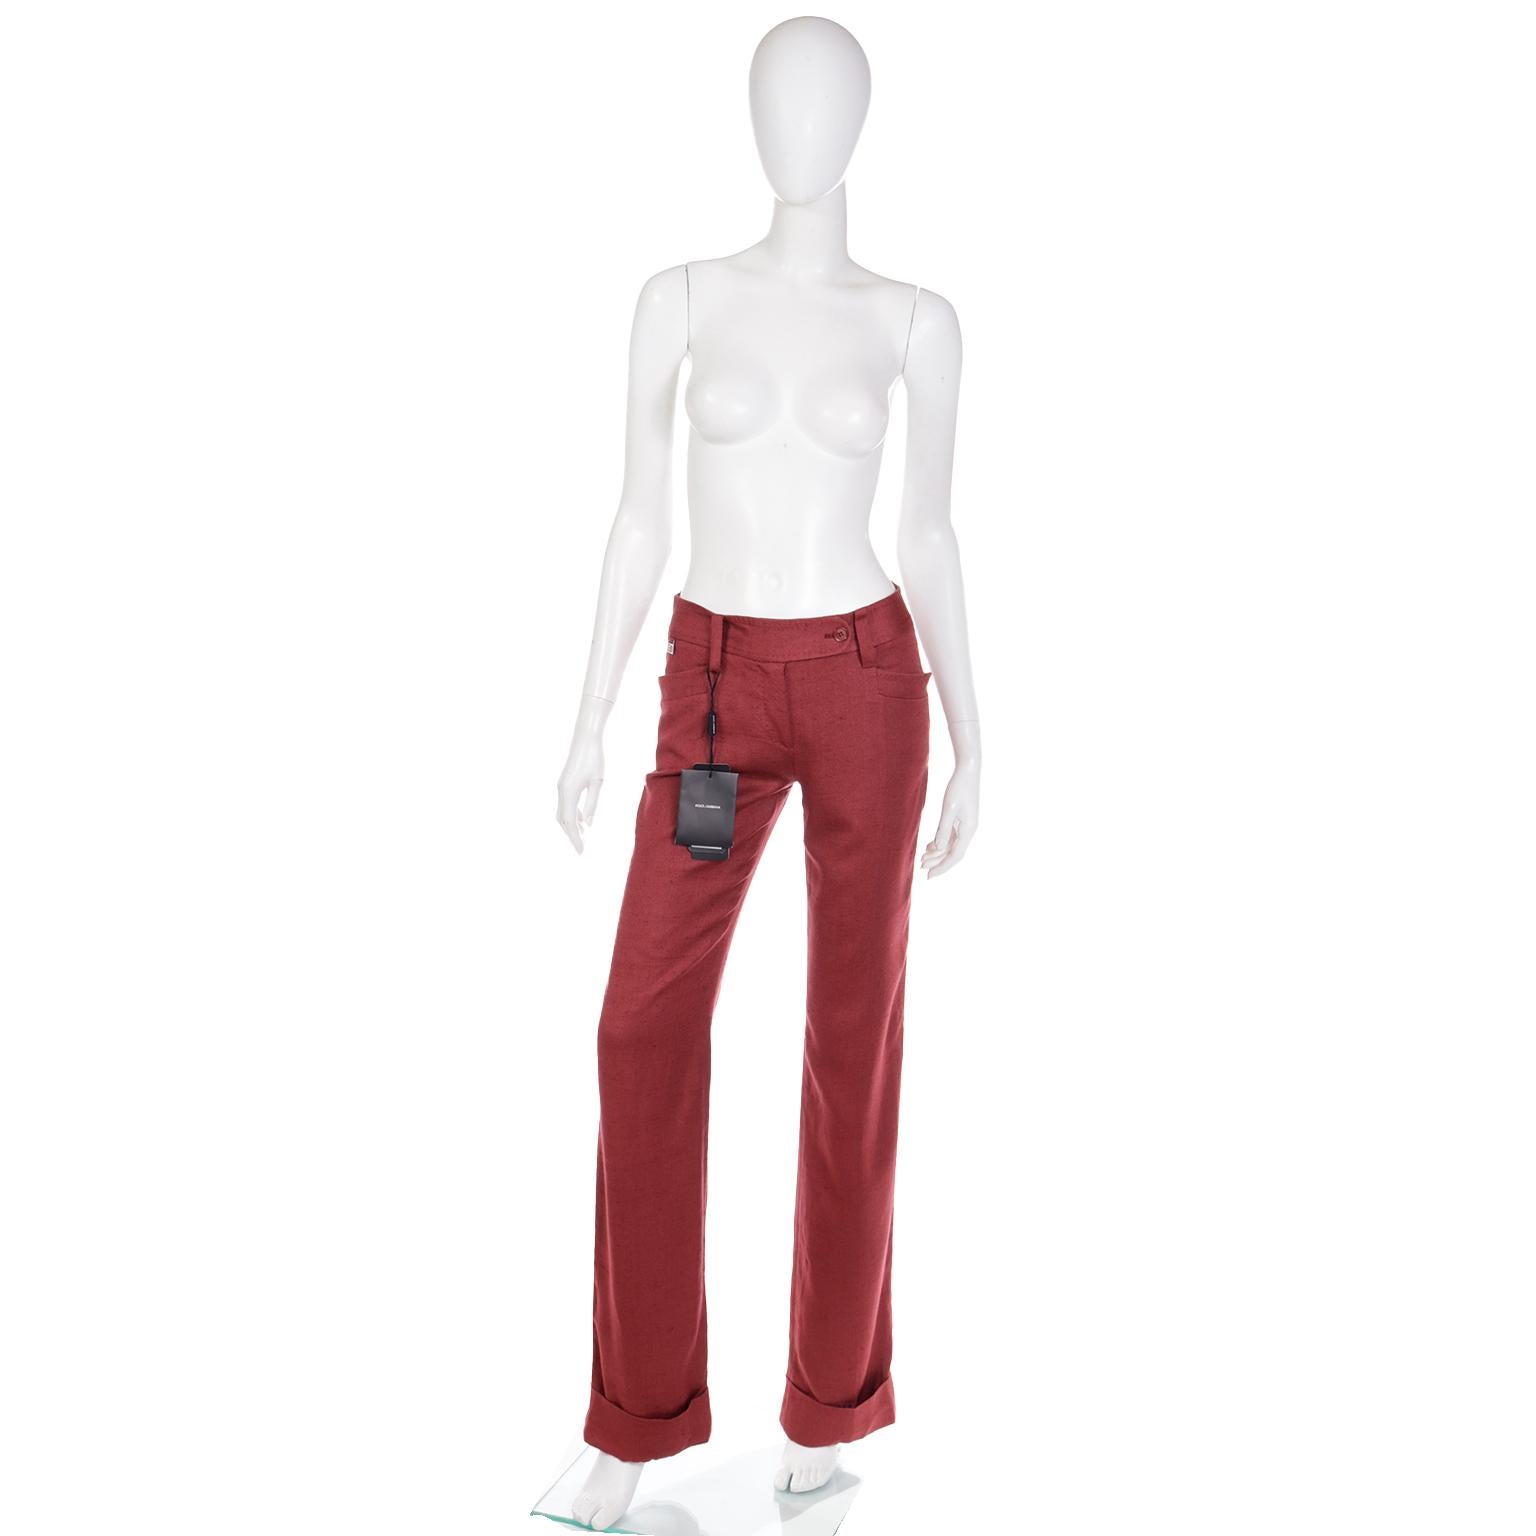 This is a beautiful pair of Dolce & Gabbana cardinal red trousers in a luxe 100% silk denim or twill weave. These pants are deadstock with their original tags attached and were never worn. The pants have front side slit pockets and two back pockets